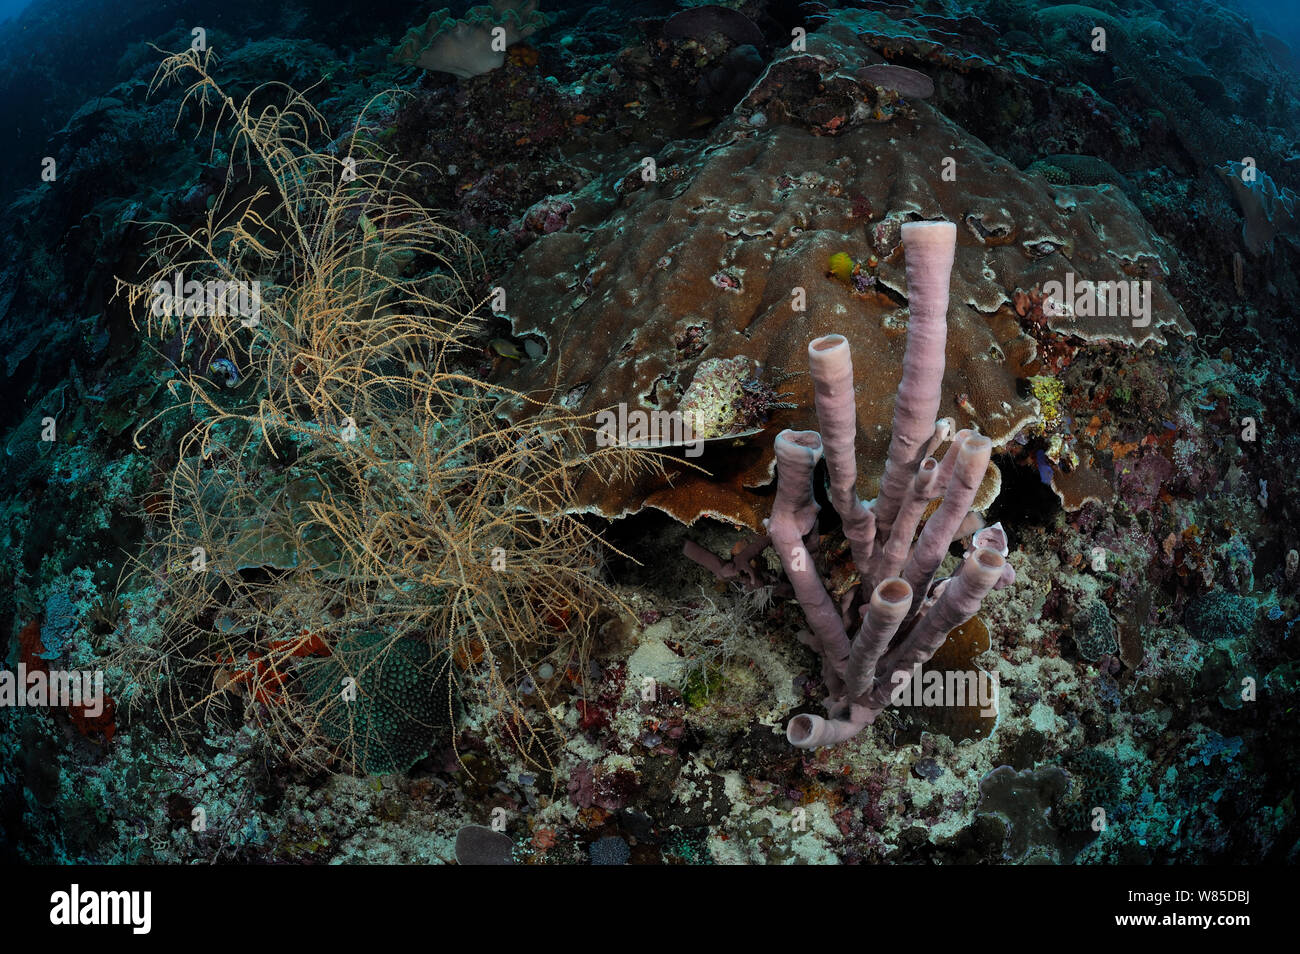 Coral Reef at 30m depth with Black coral (Antipathes dichotoma) left and Tube sponge (Haliclona / Kallypilidion sp) on the right, Raja Ampat, West Papua, Indonesia, Pacific Ocean. Stock Photo